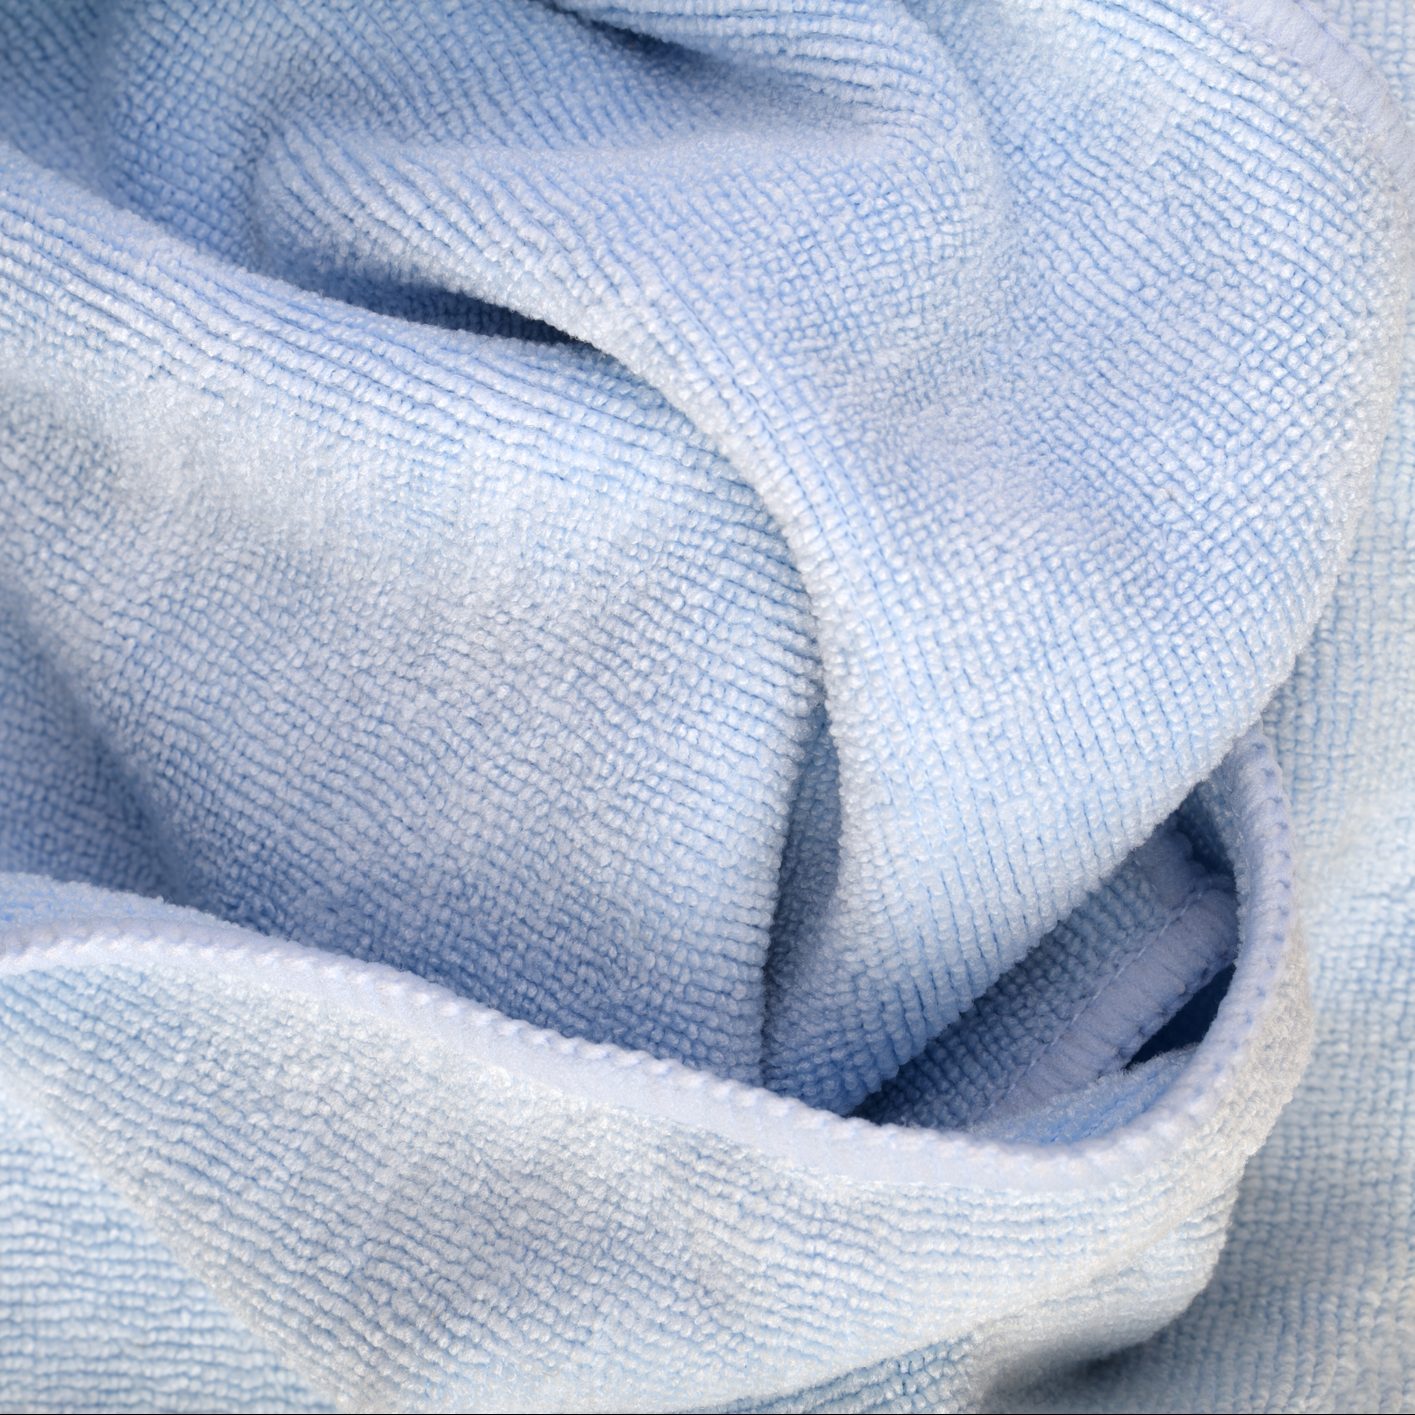 Blue microfiber cleaning cloth